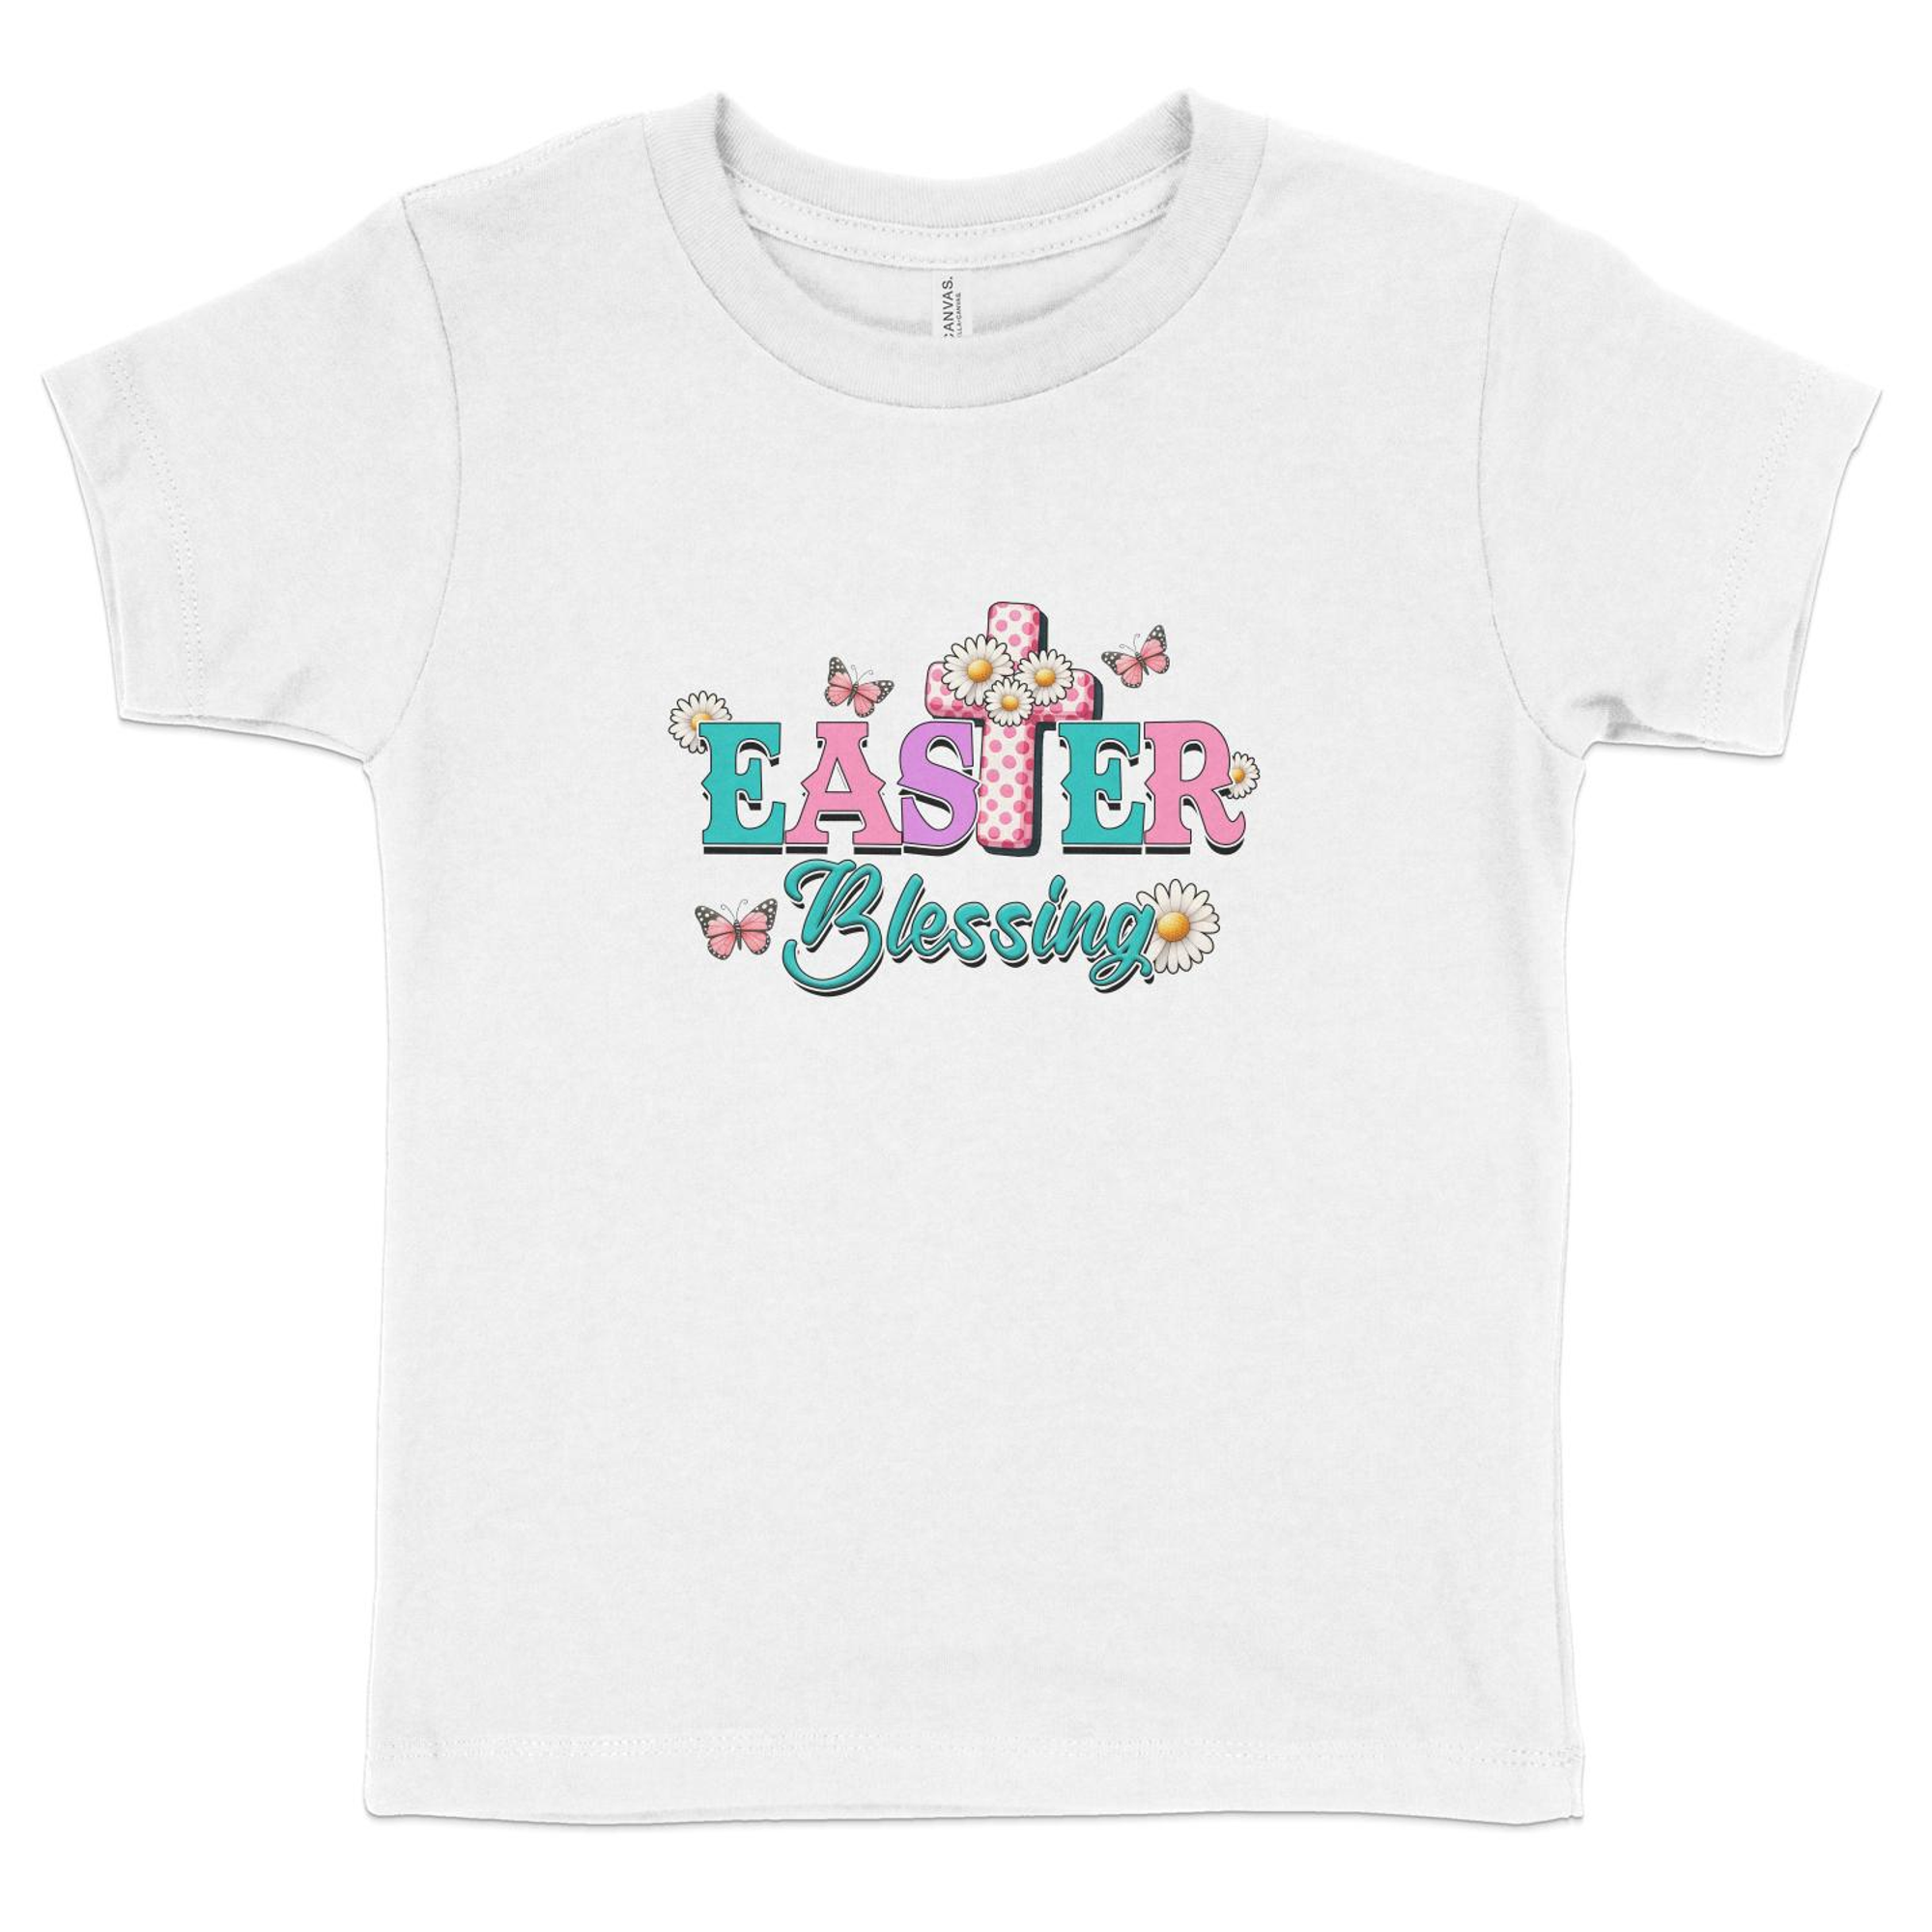 Easter Blessings Toddler Short Sleeve Tee Size: 5/6T Color: White Jesus Passion Apparel